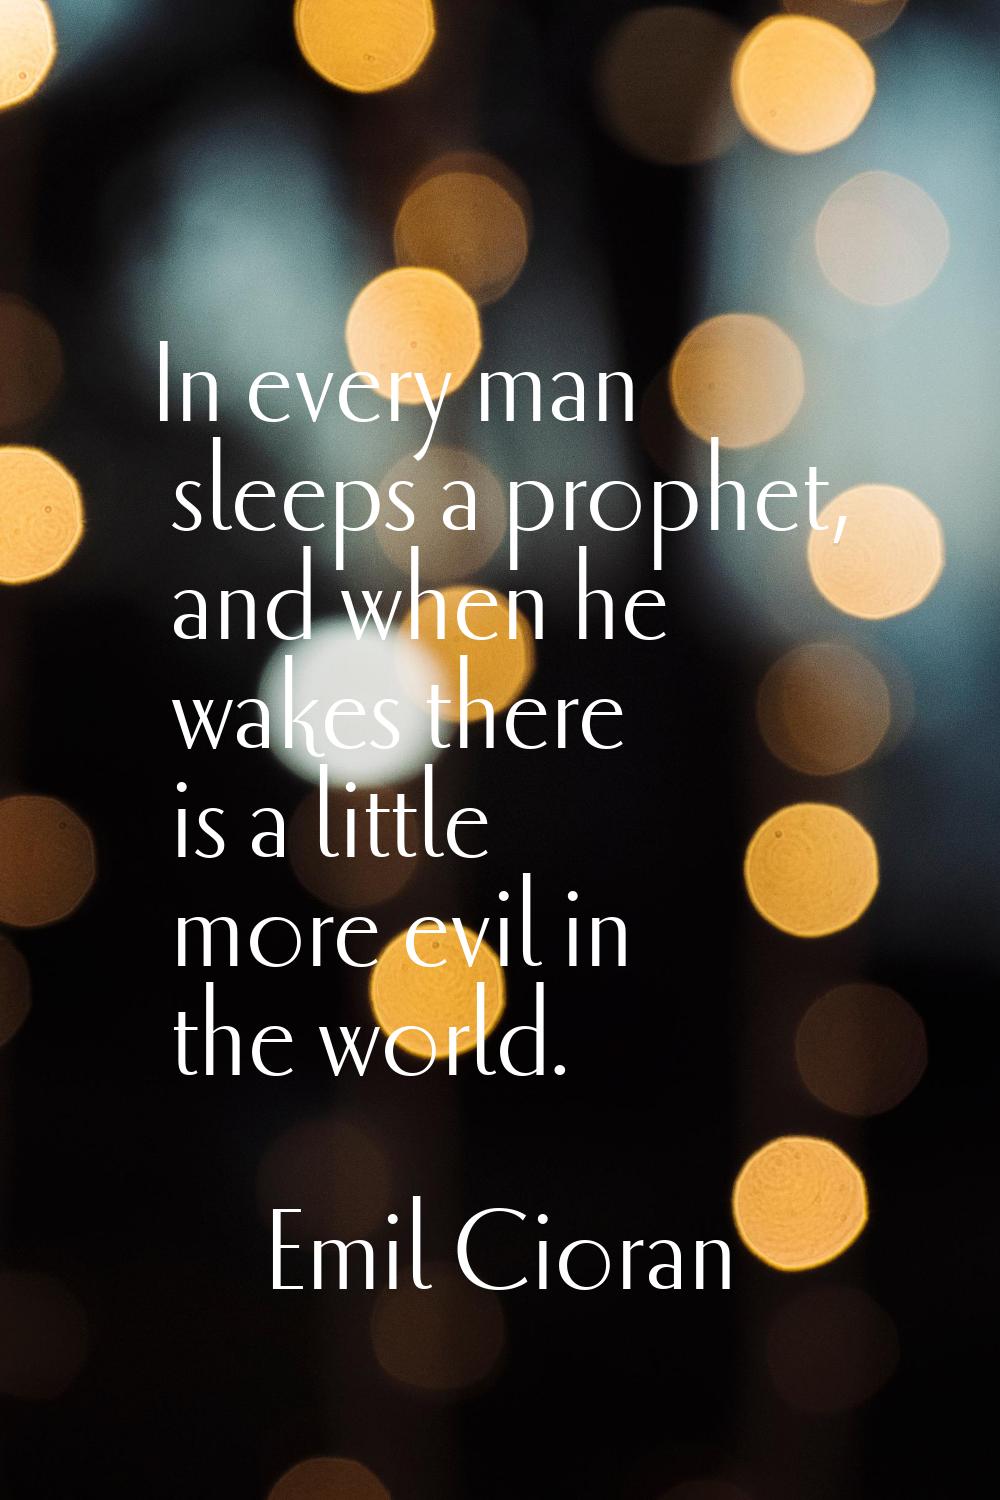 In every man sleeps a prophet, and when he wakes there is a little more evil in the world.